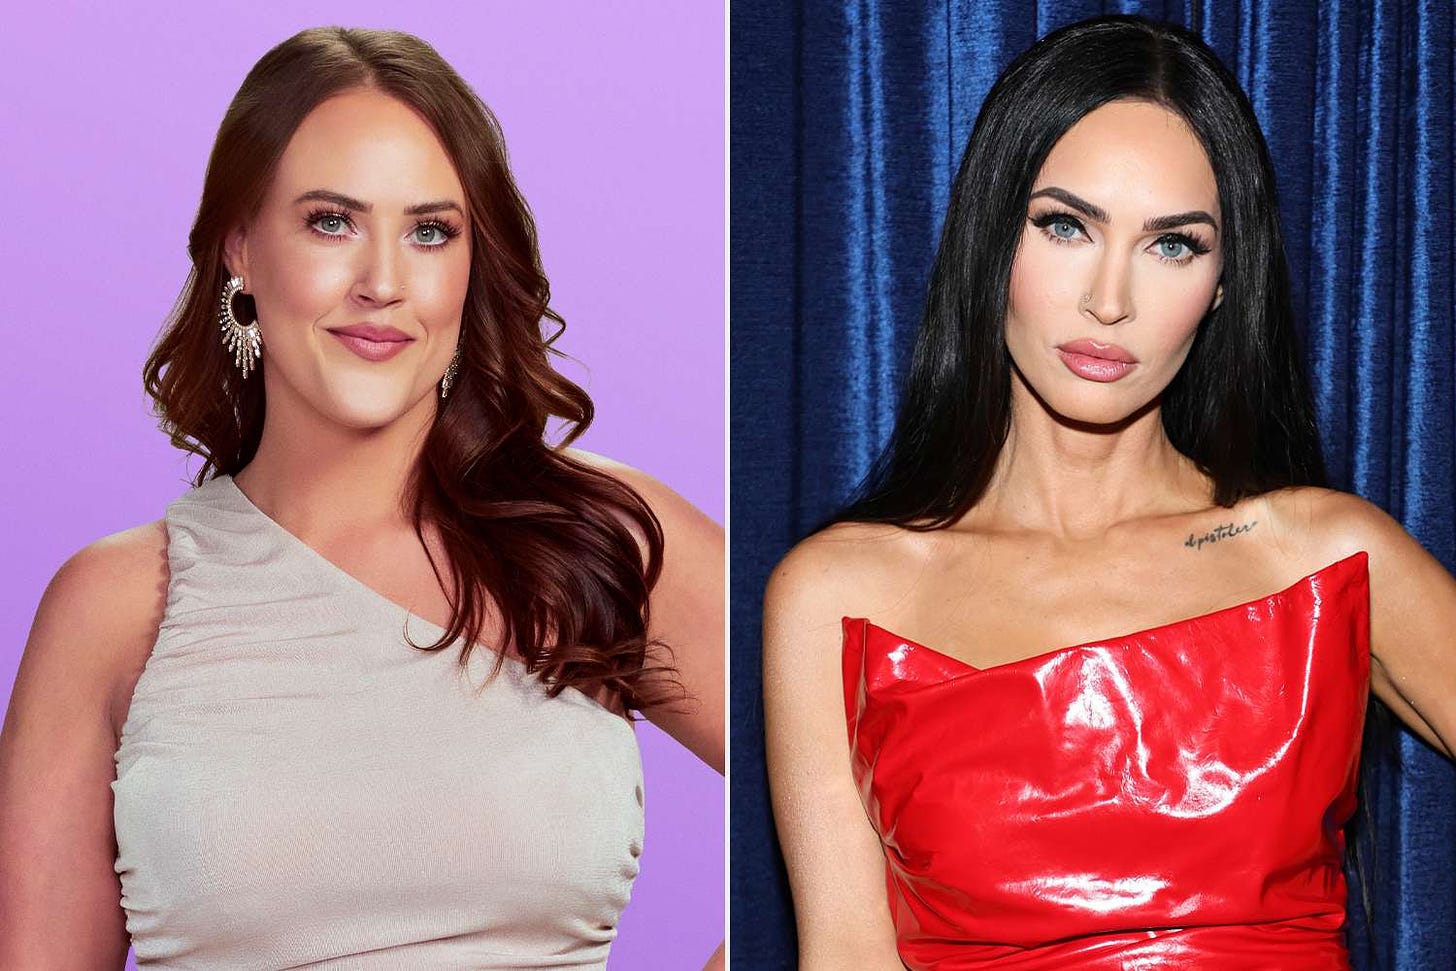 Love Is Blind: Chelsea Reacts to Getting 'Dragged' over Megan Fox Comparison